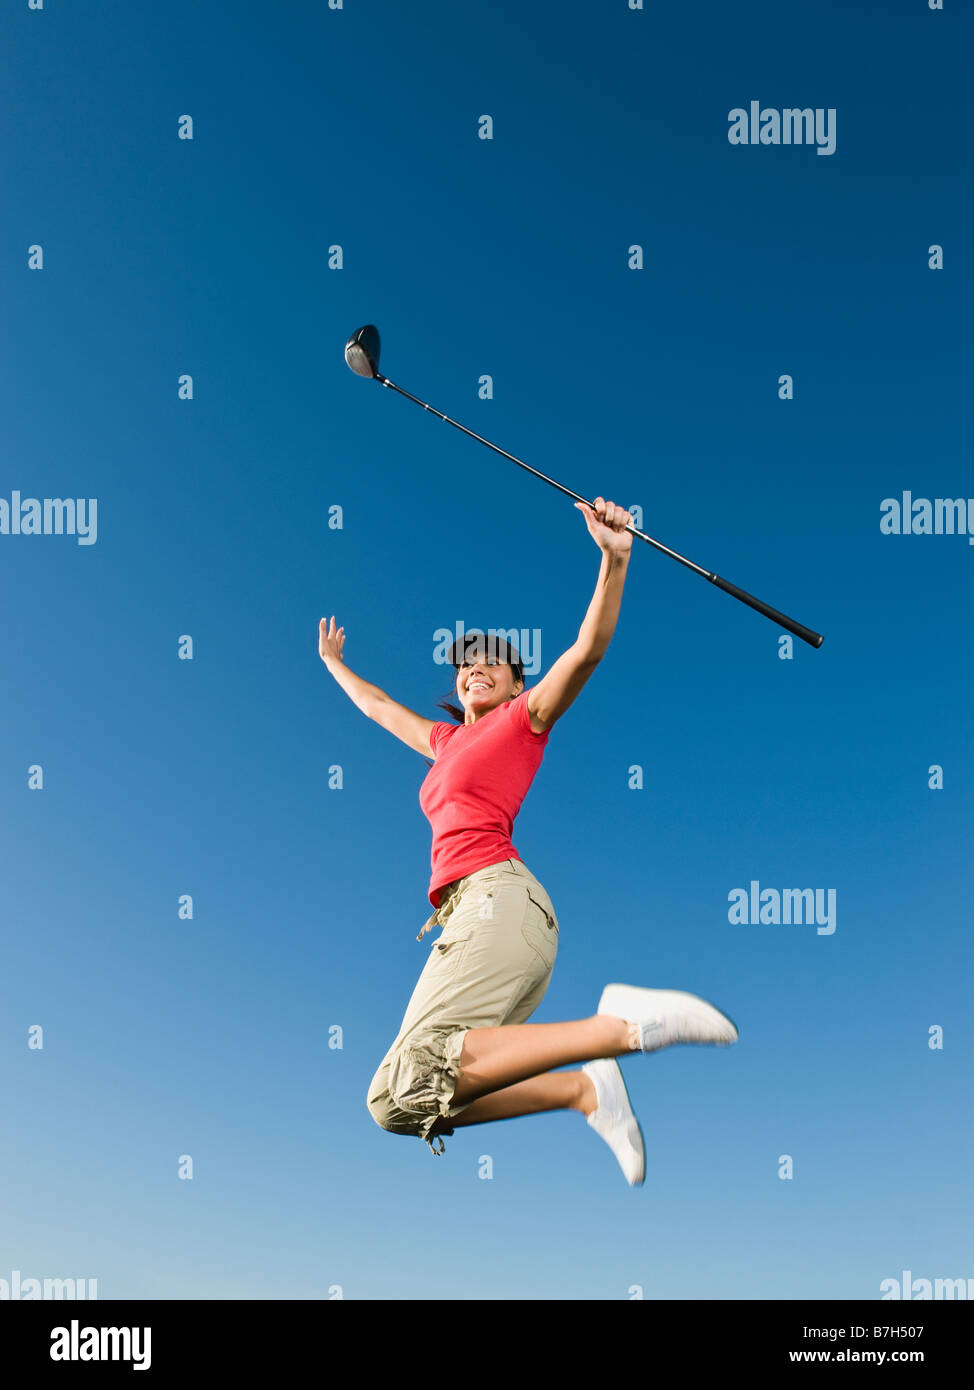 Native American woman with golf club jumping in mid-air Stock Photo